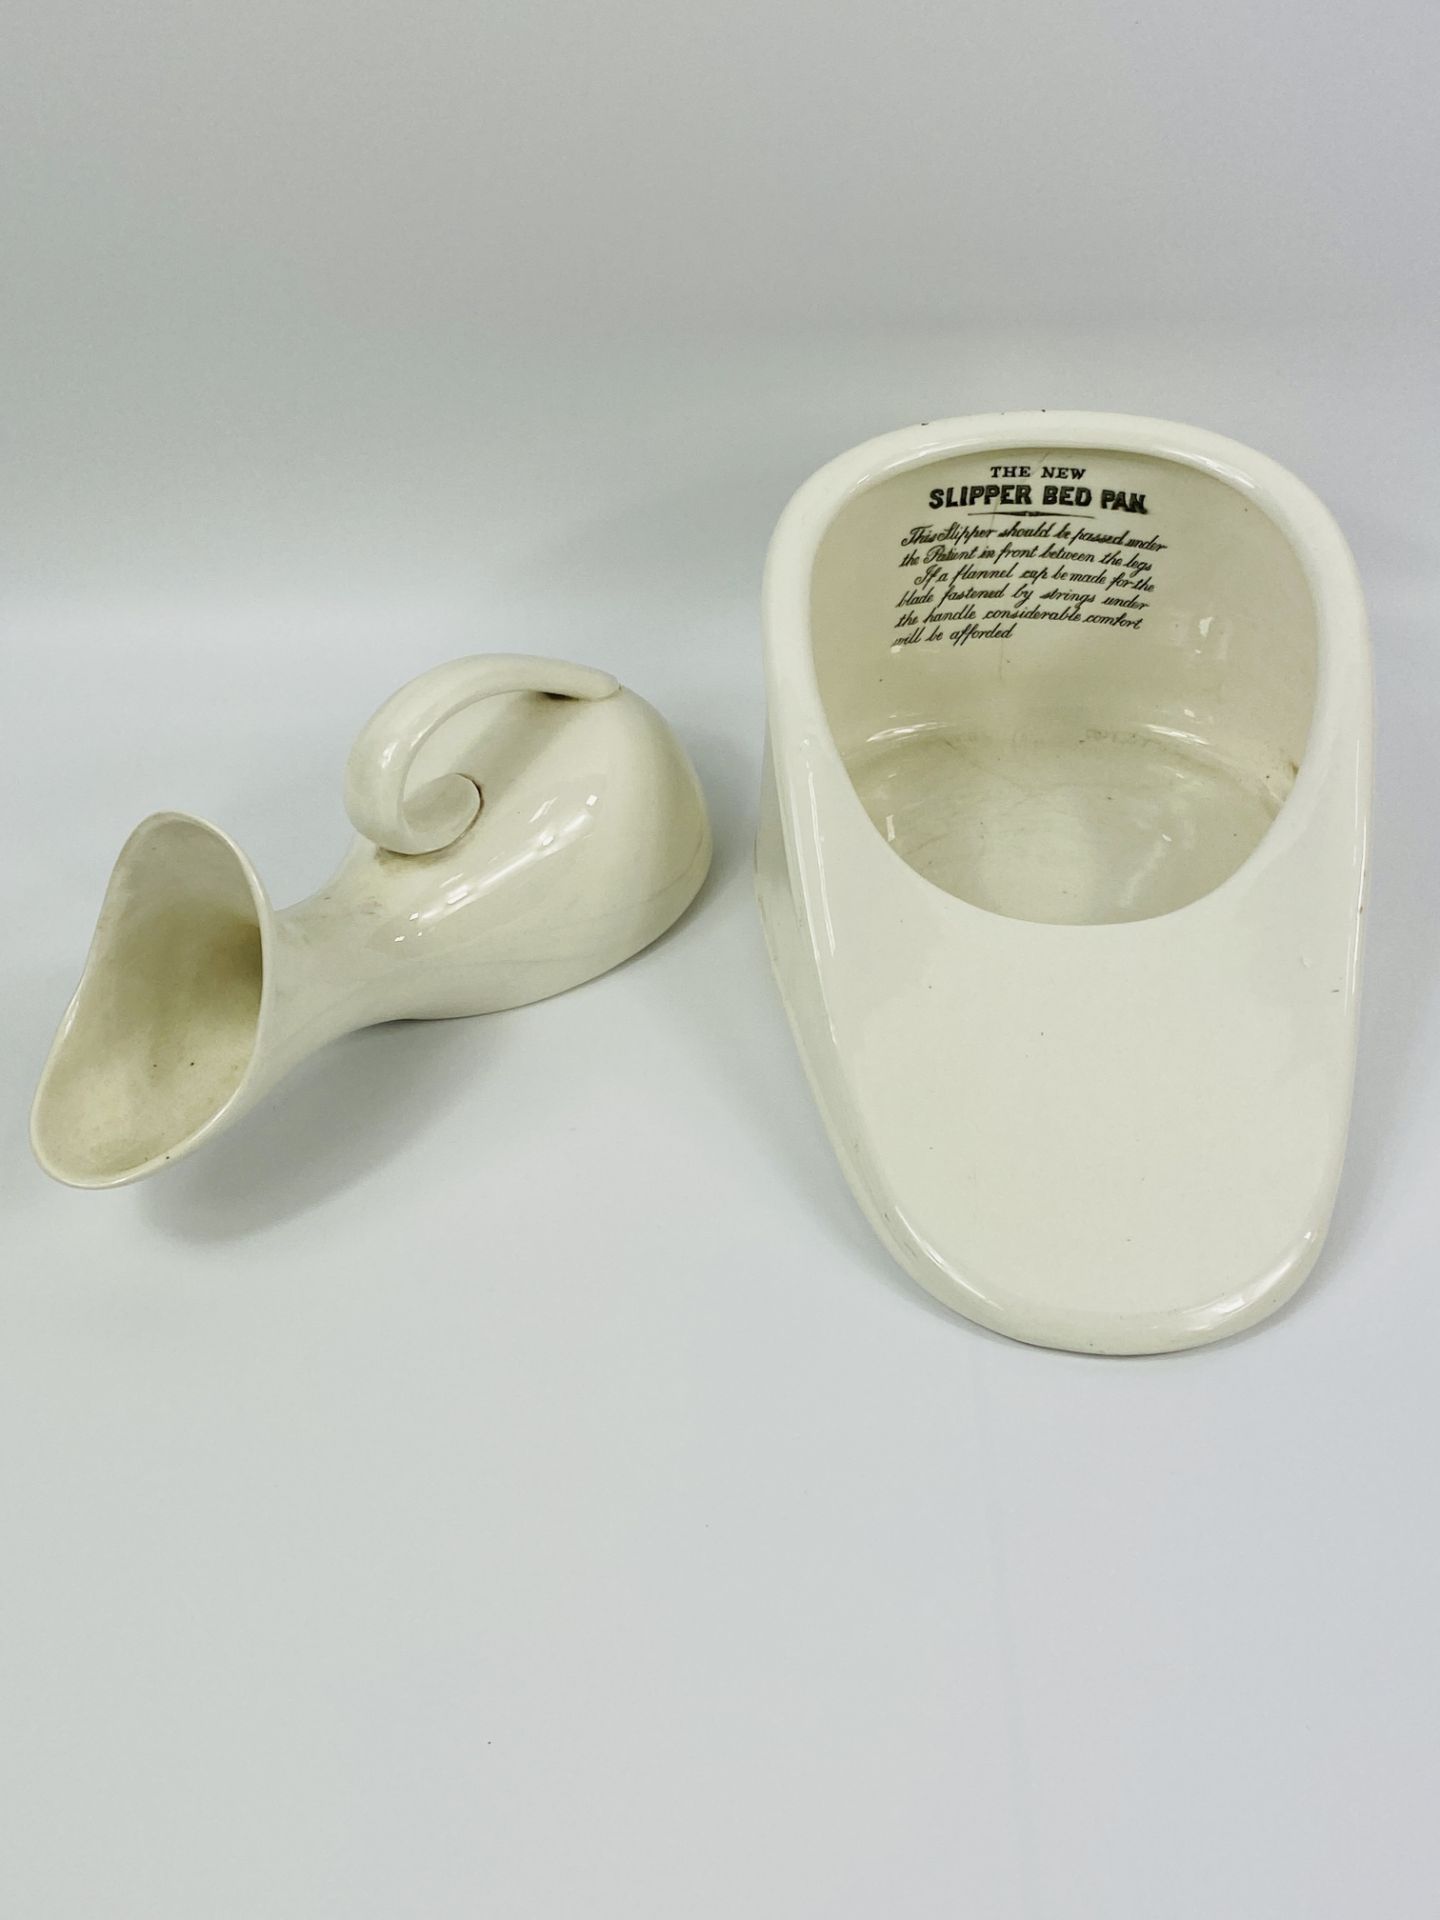 Slipper bedpan and a ceramic bed bottle - Image 2 of 6